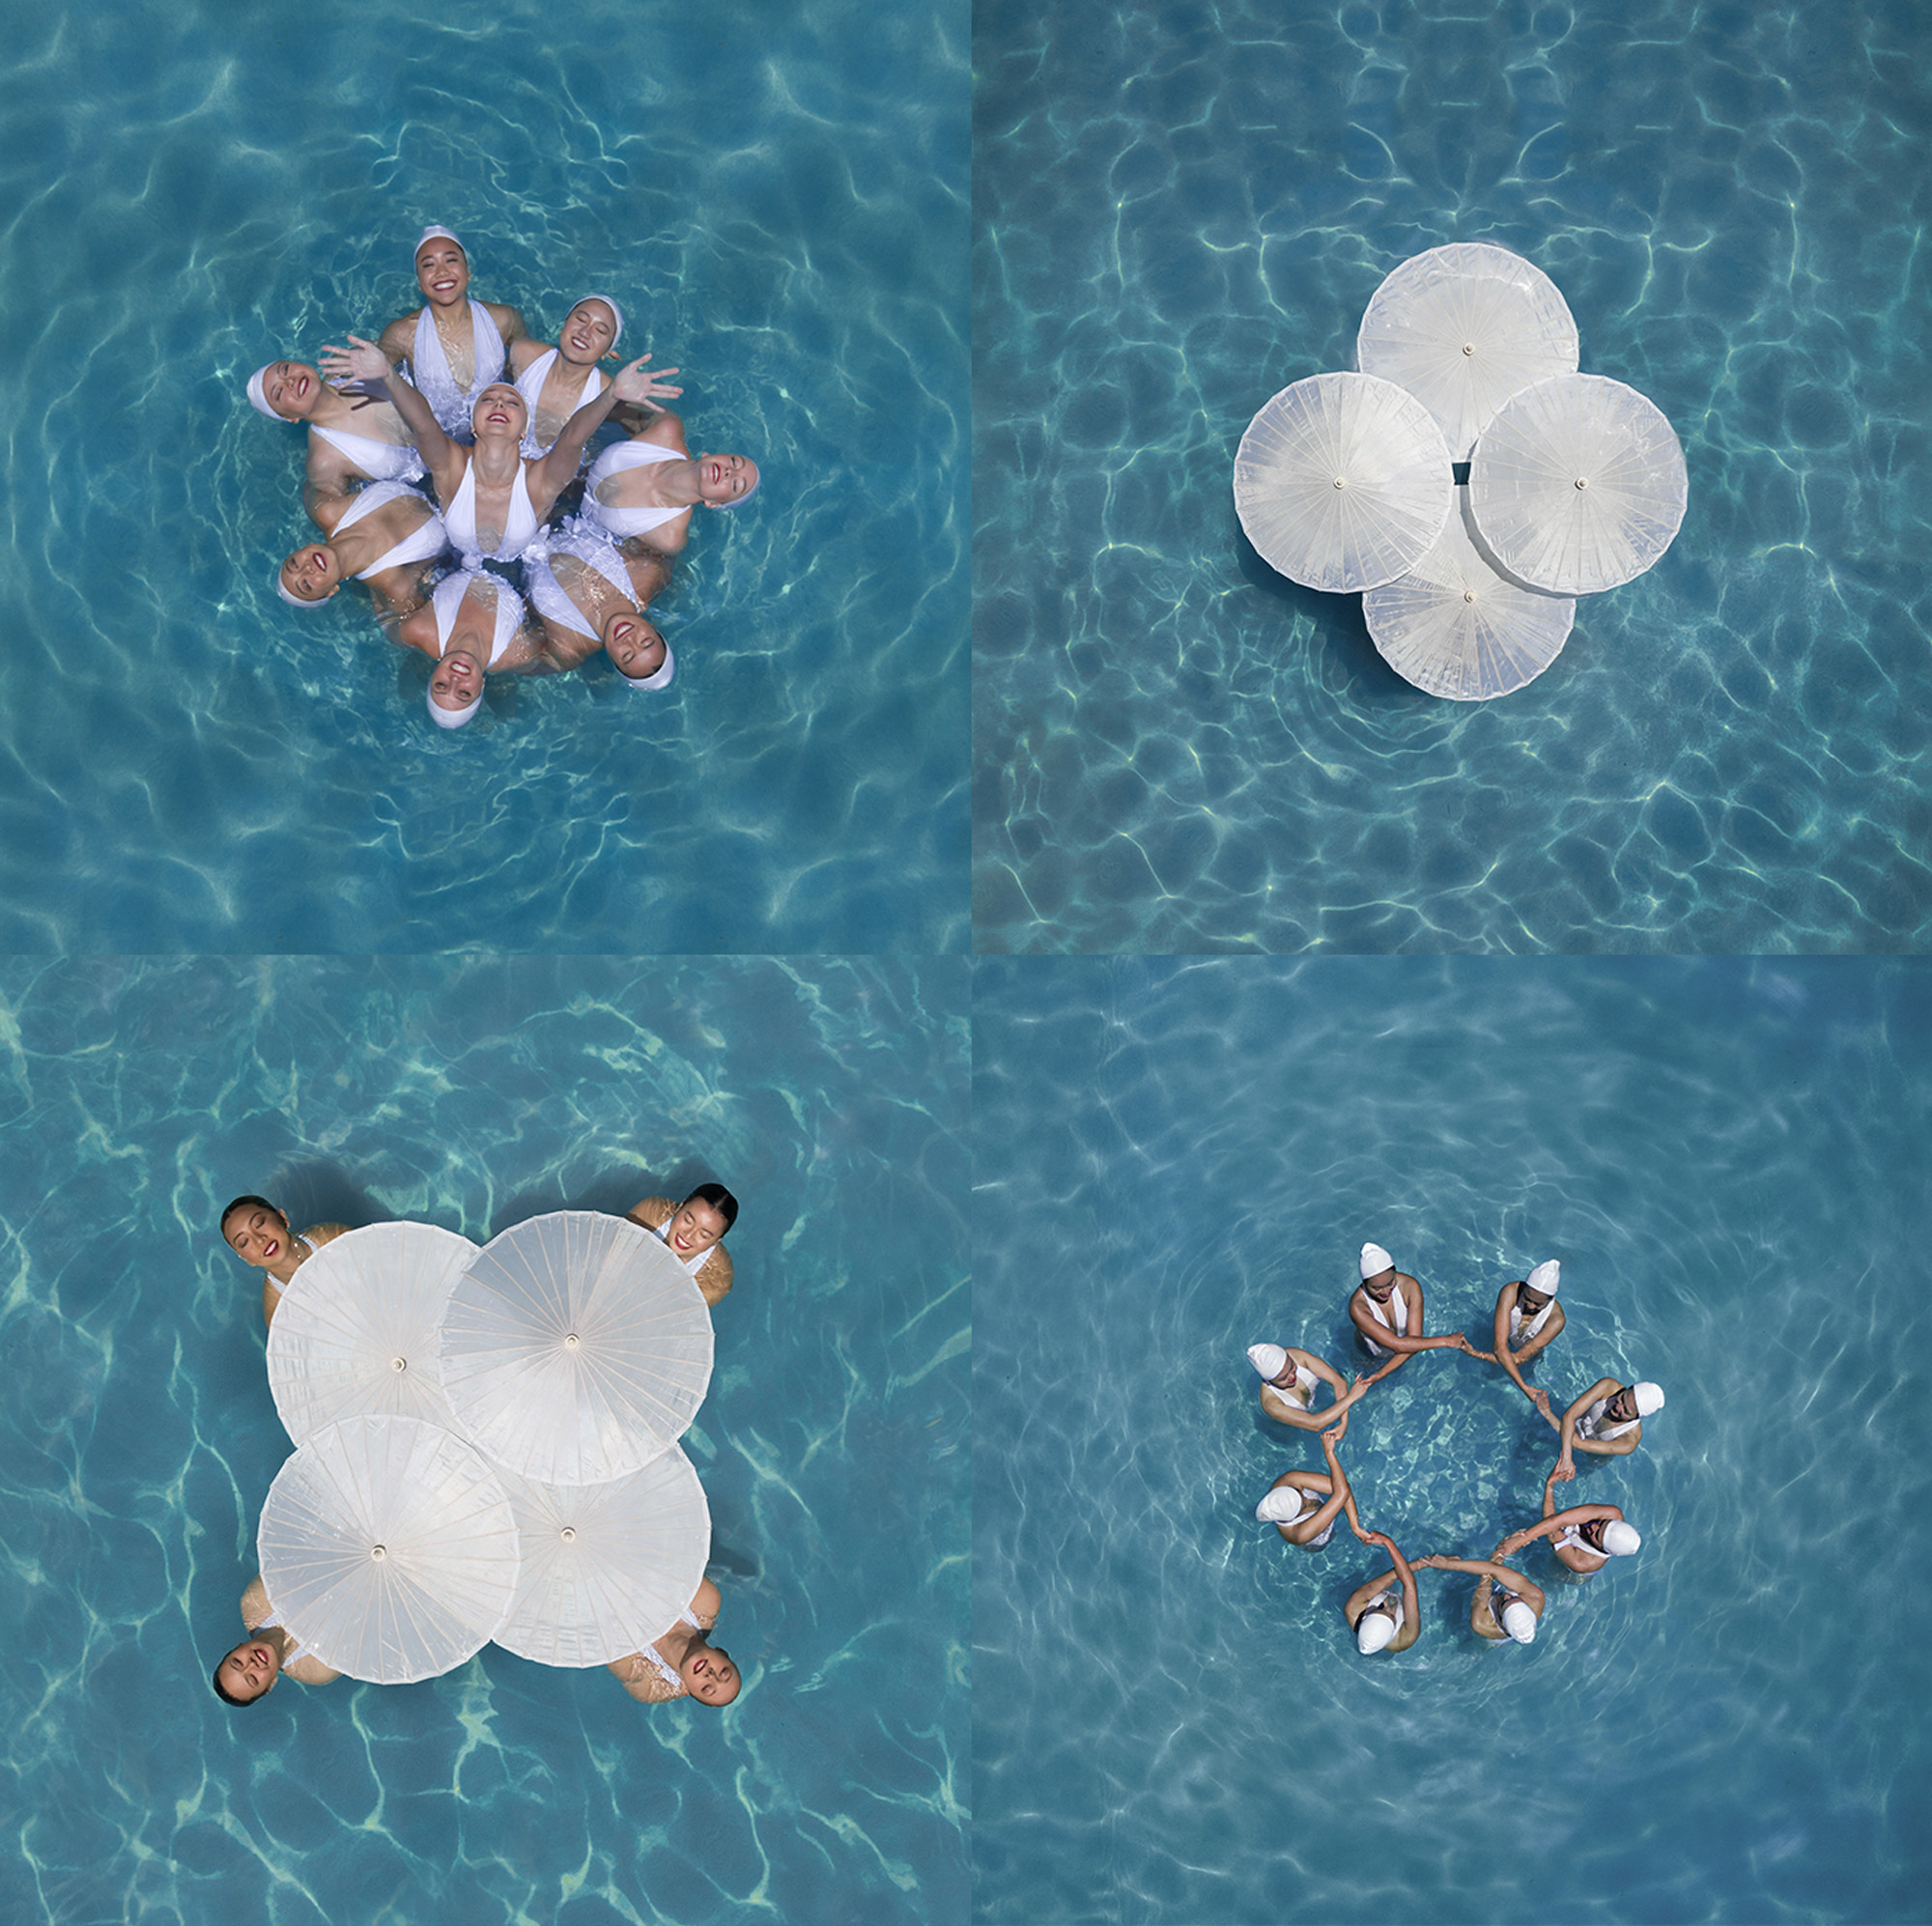 4 images of different poses of a synchronised swimming team with umbrellas